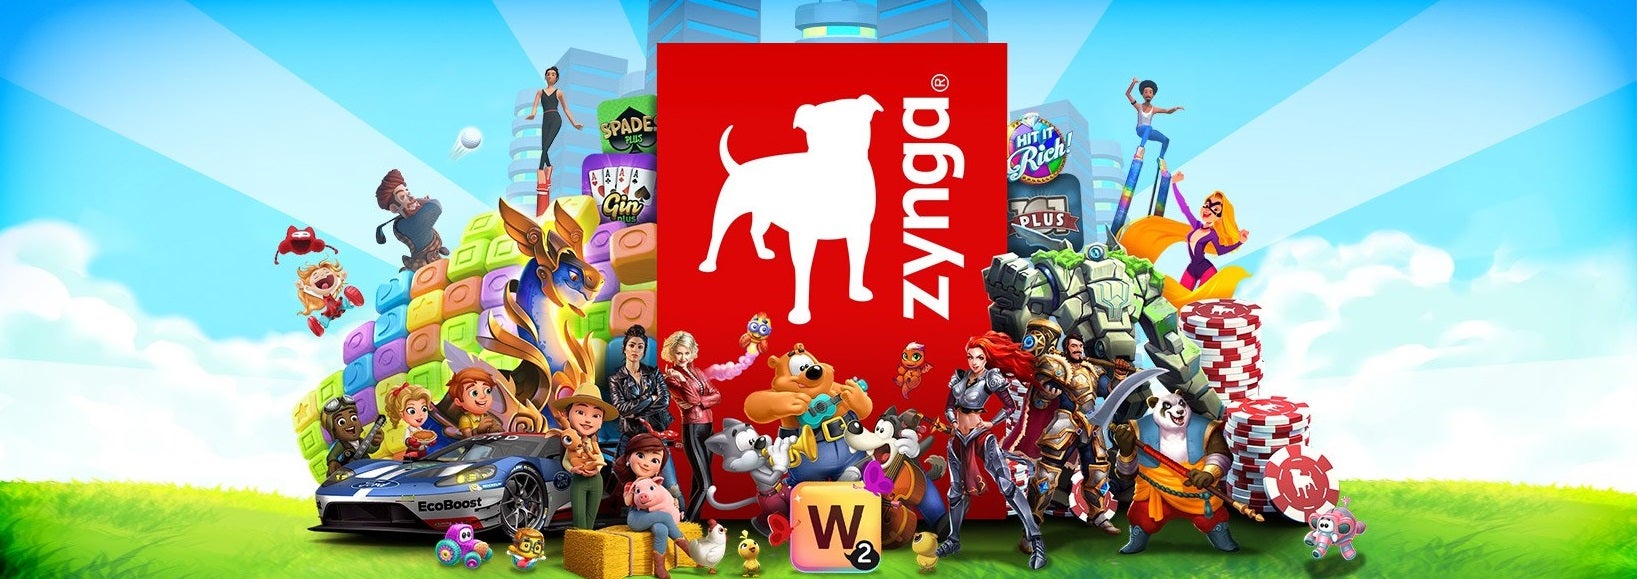 Image for Zynga reports 2% revenue increase to $691 million for Q1 2022